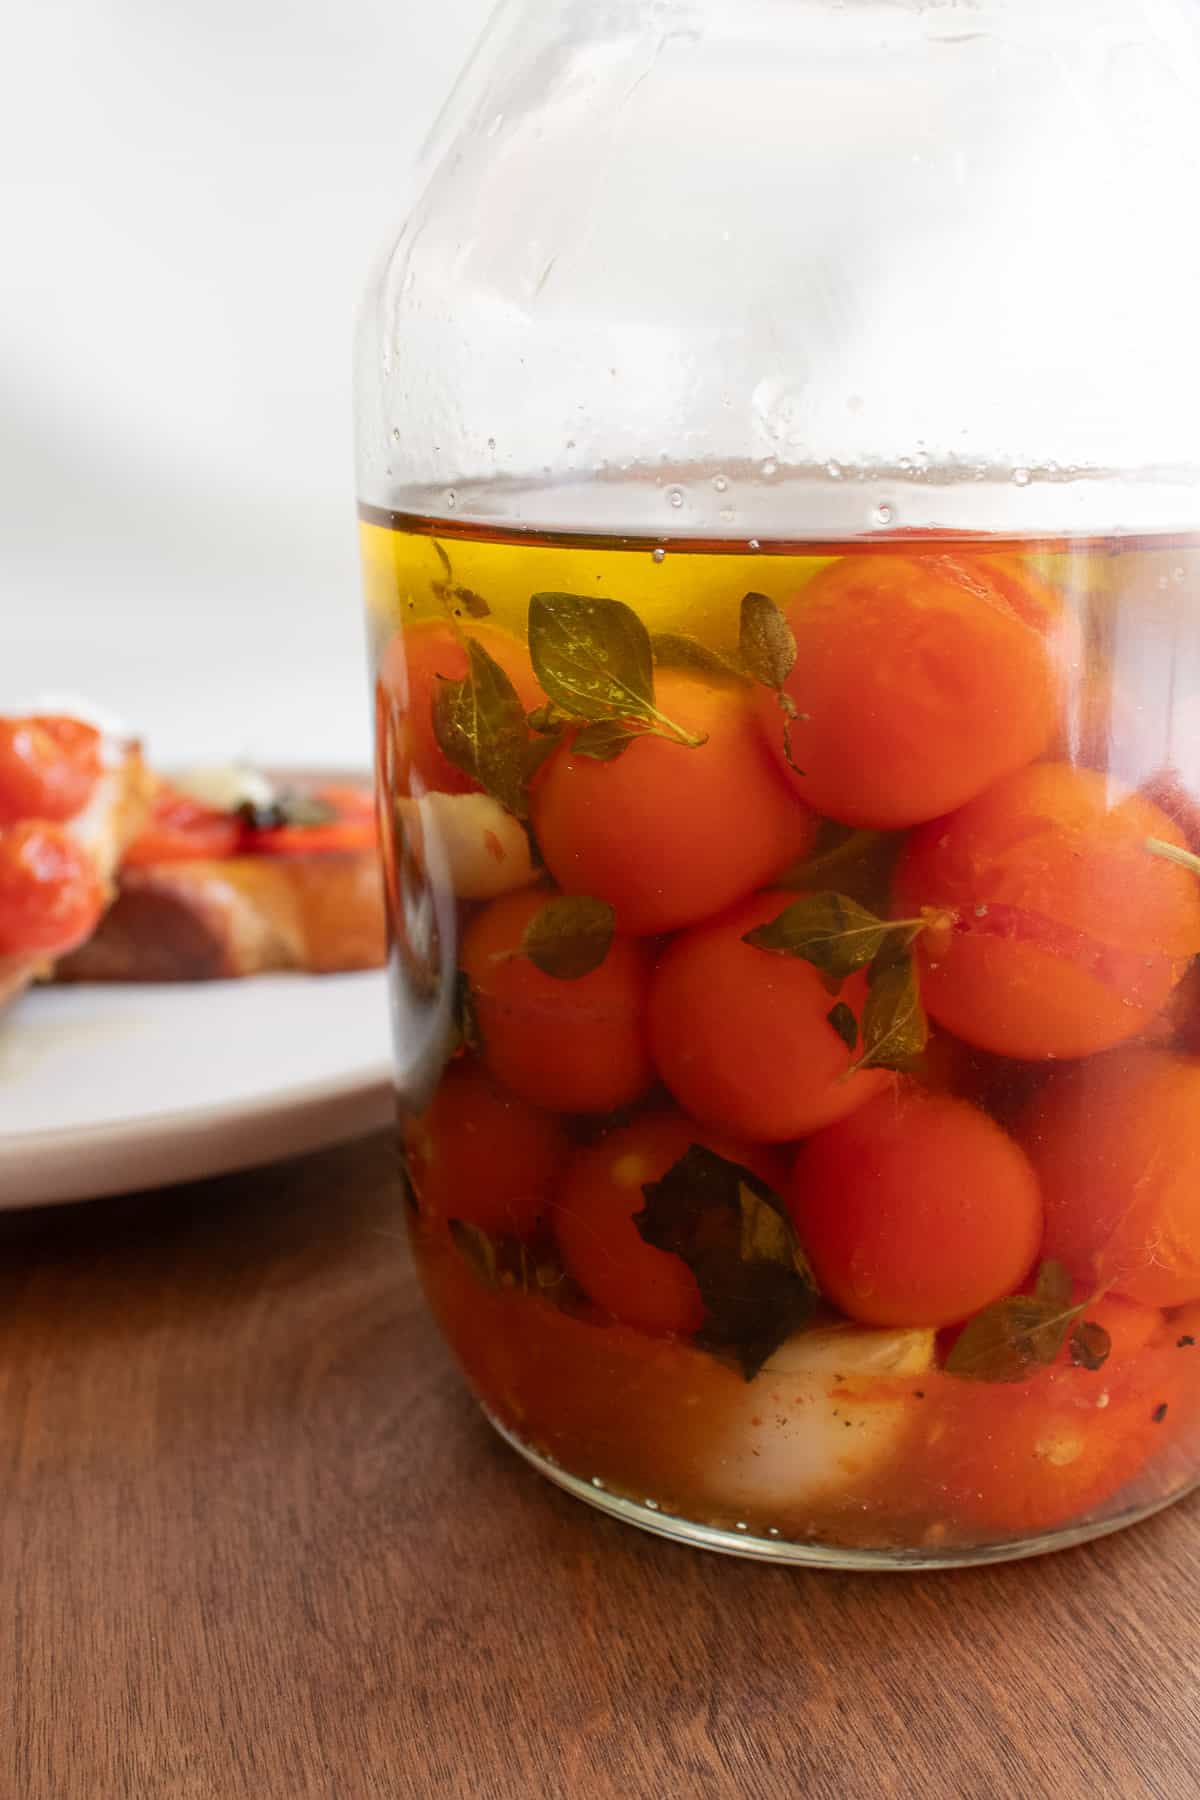 The cherry tomato confit and oil stored in a clear glass jar.